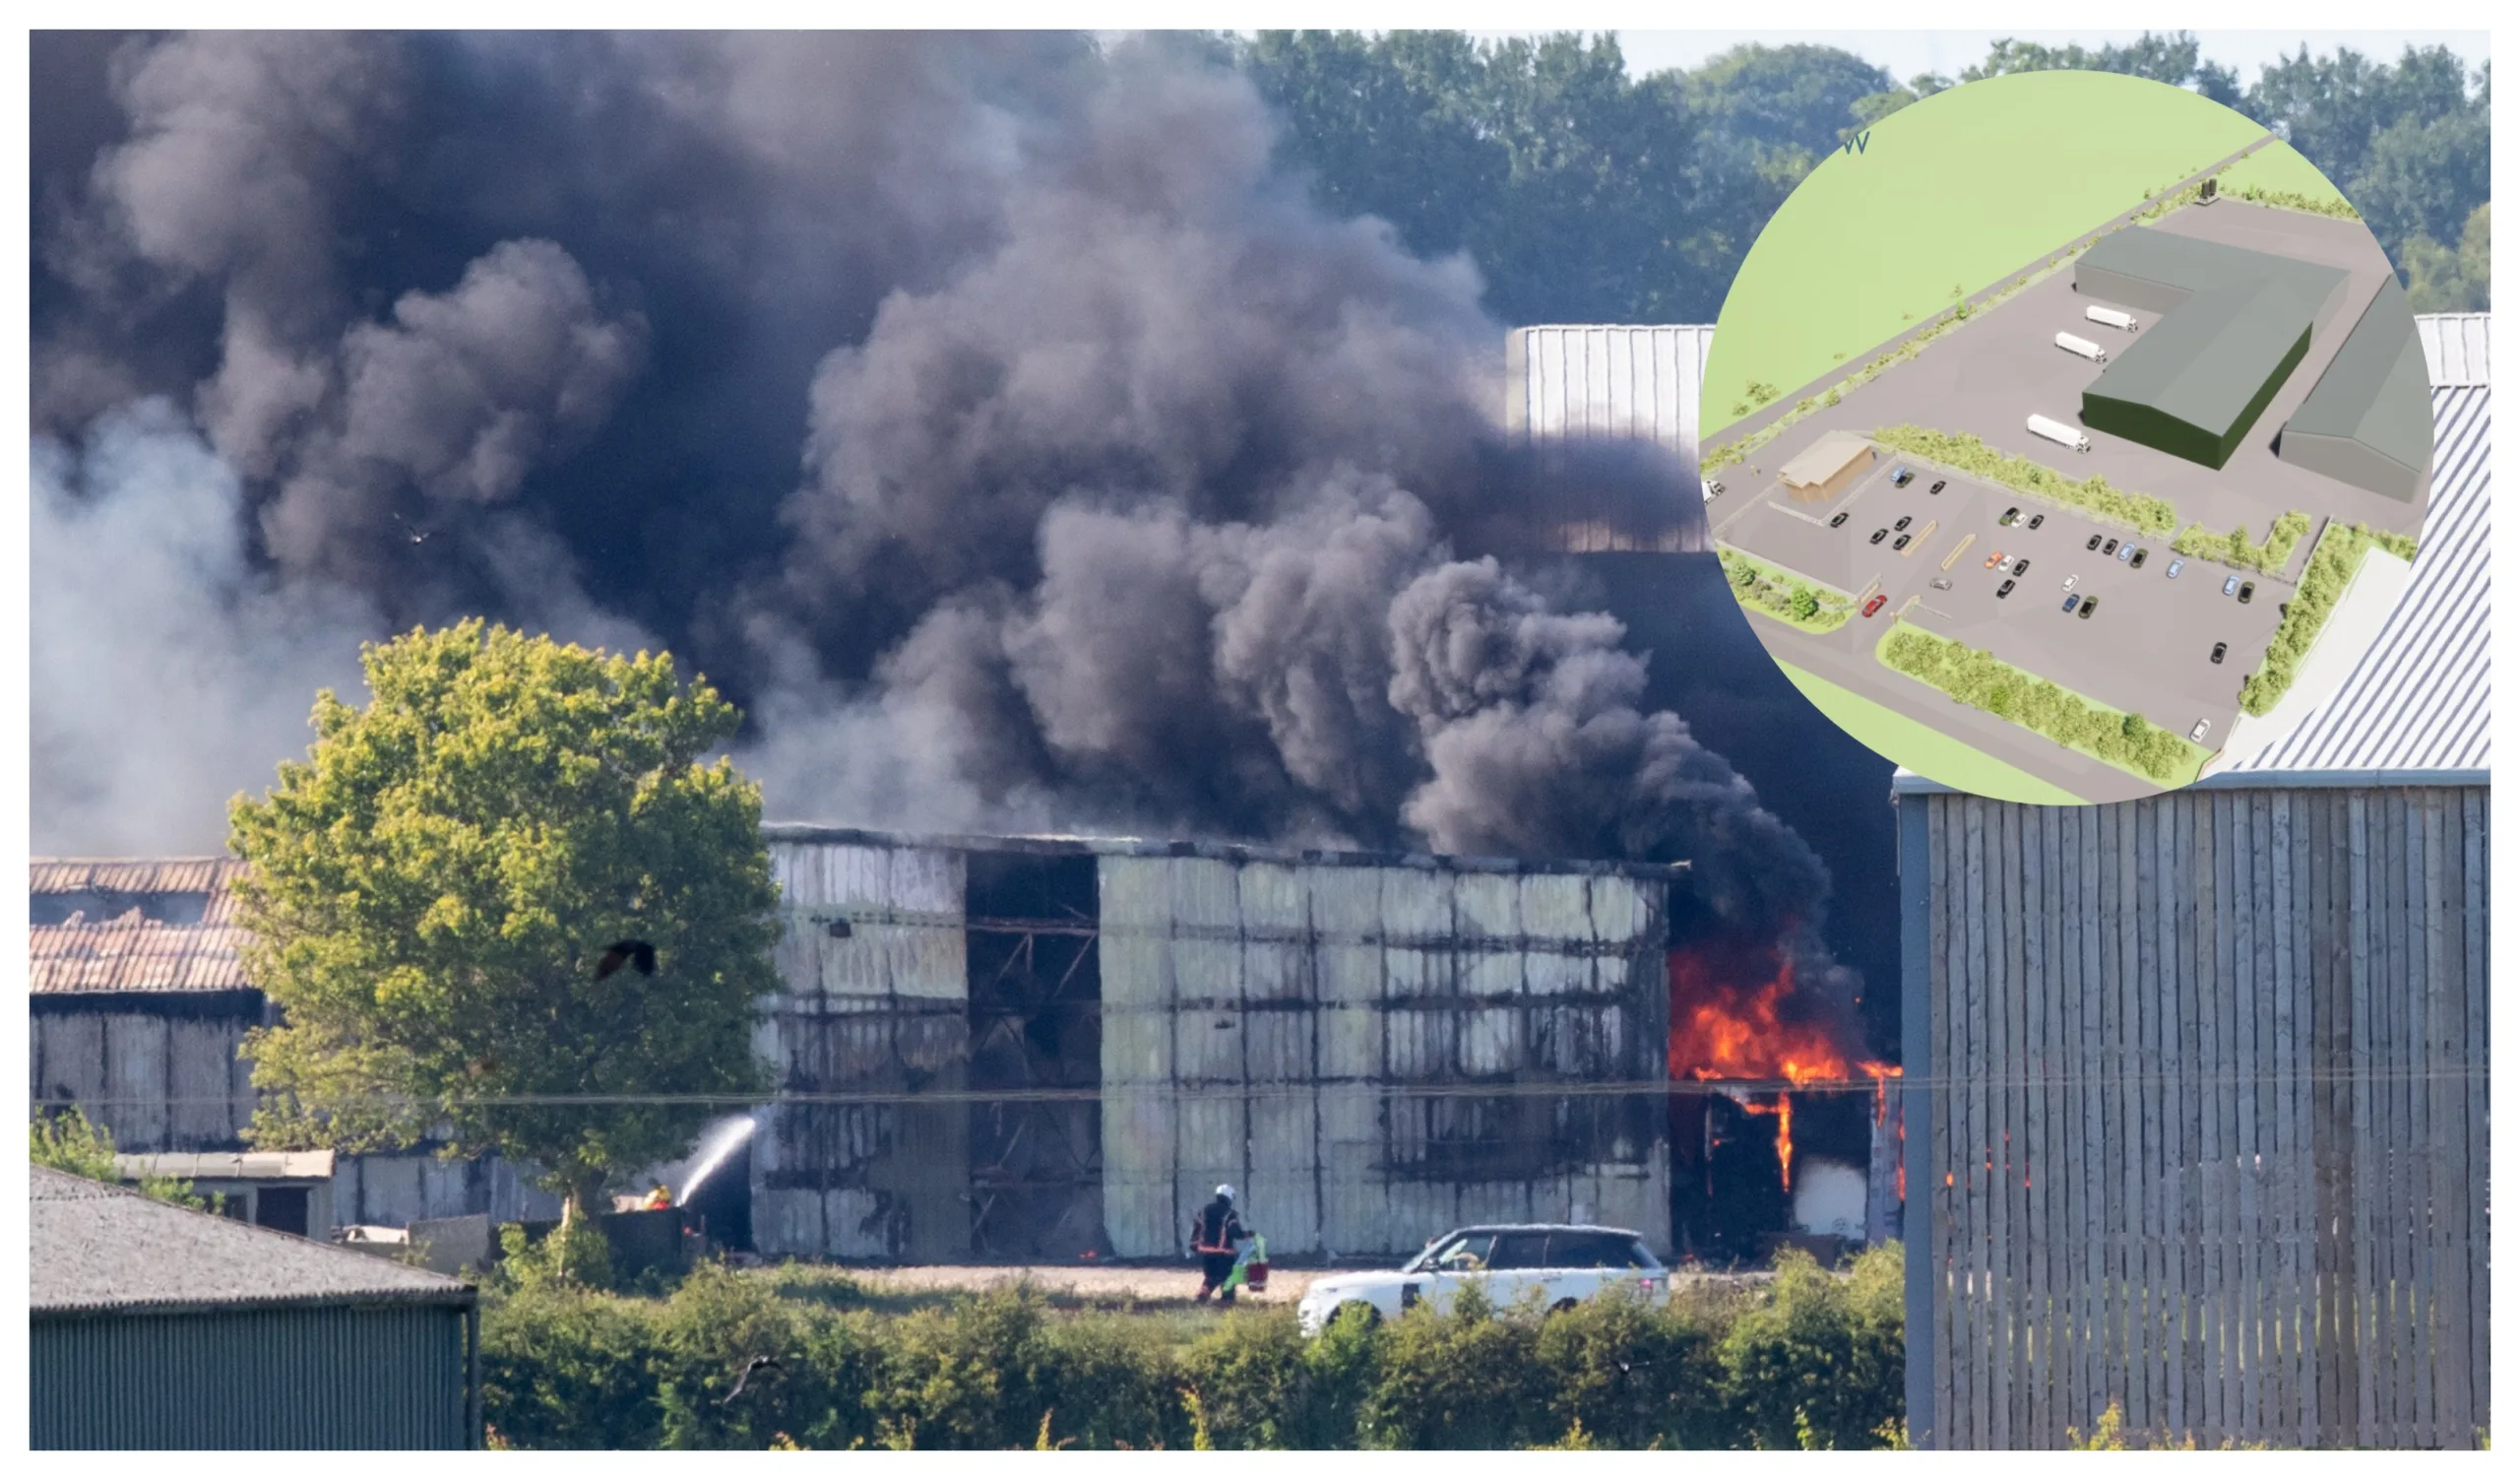 Flashback to the fire in May 2020 with (inset) concept by Corkers of new factory planned for the site at Willow Farm near Ely.